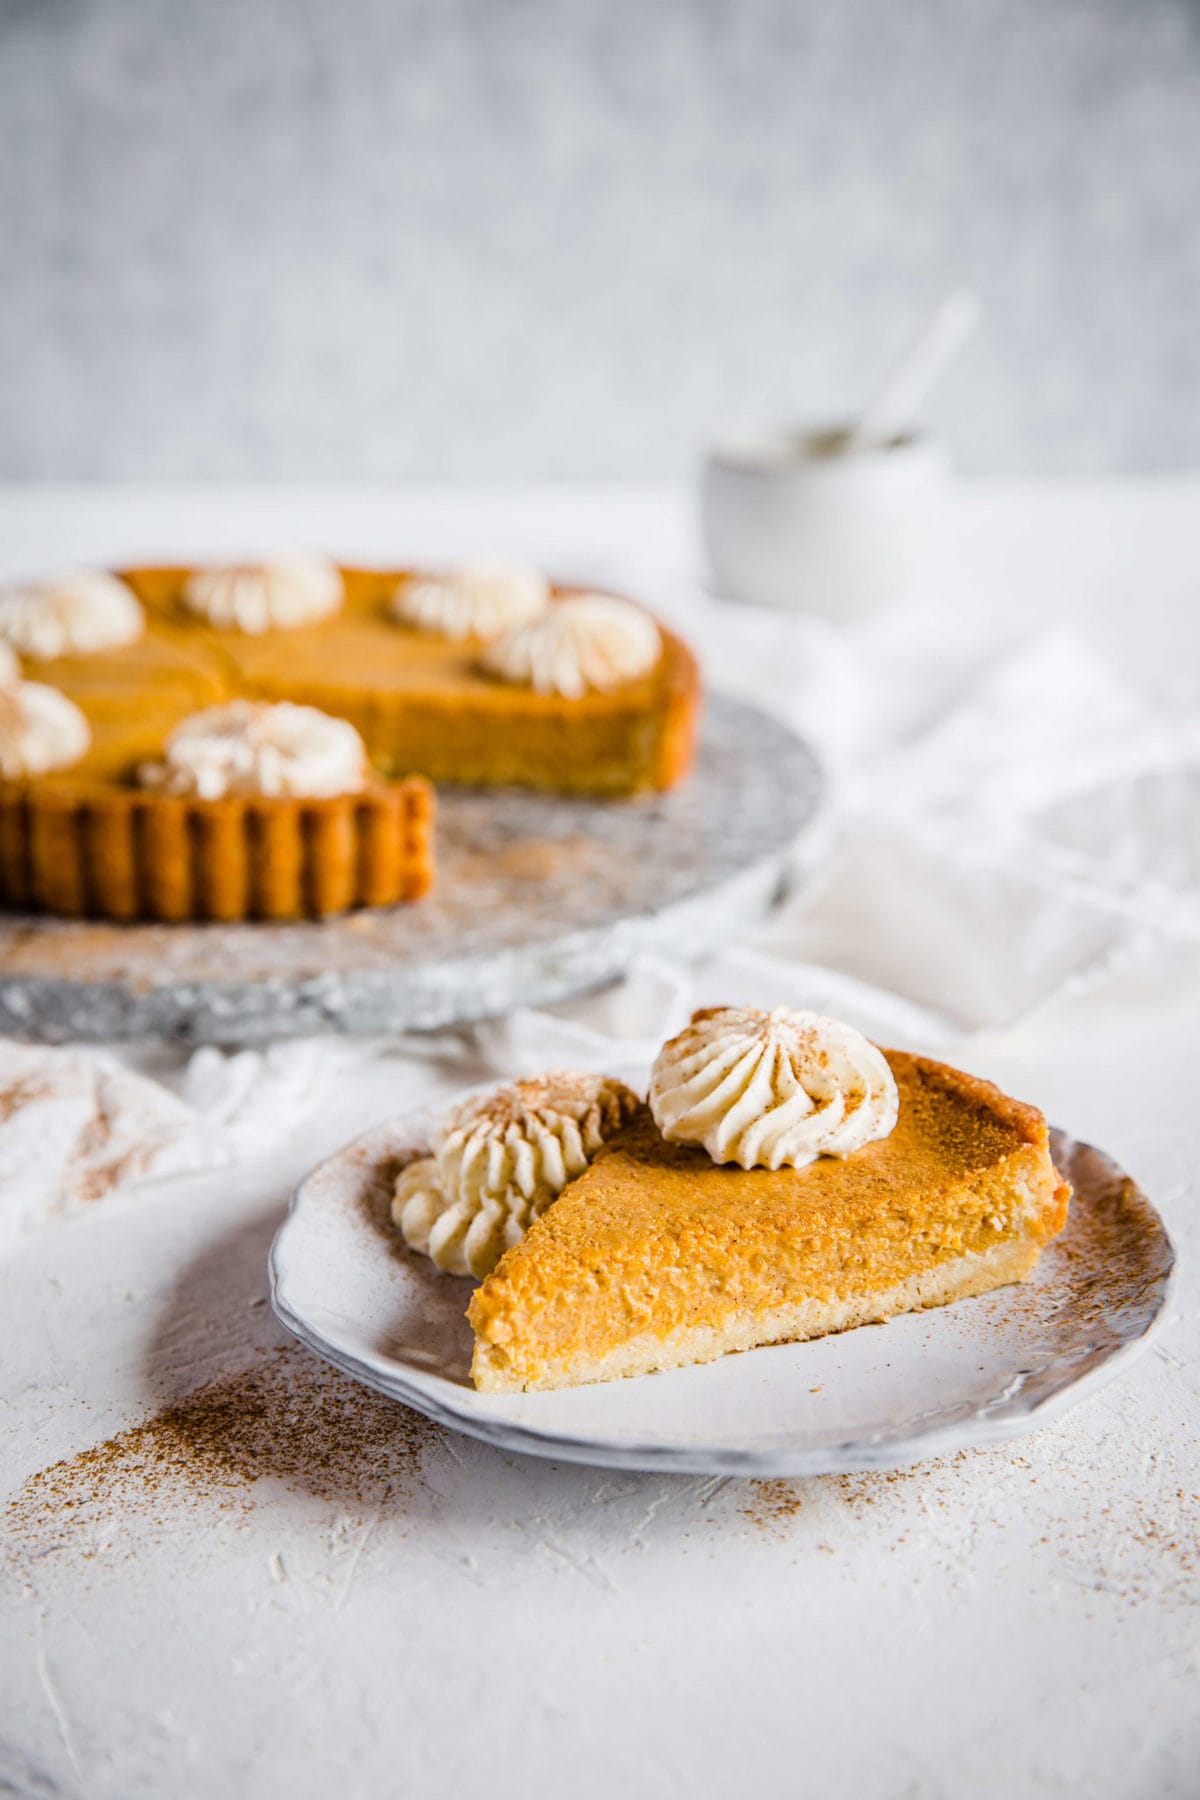 a slice of pumpkin pie on a plate, garnished with fresh whipped cream and cinnamon.